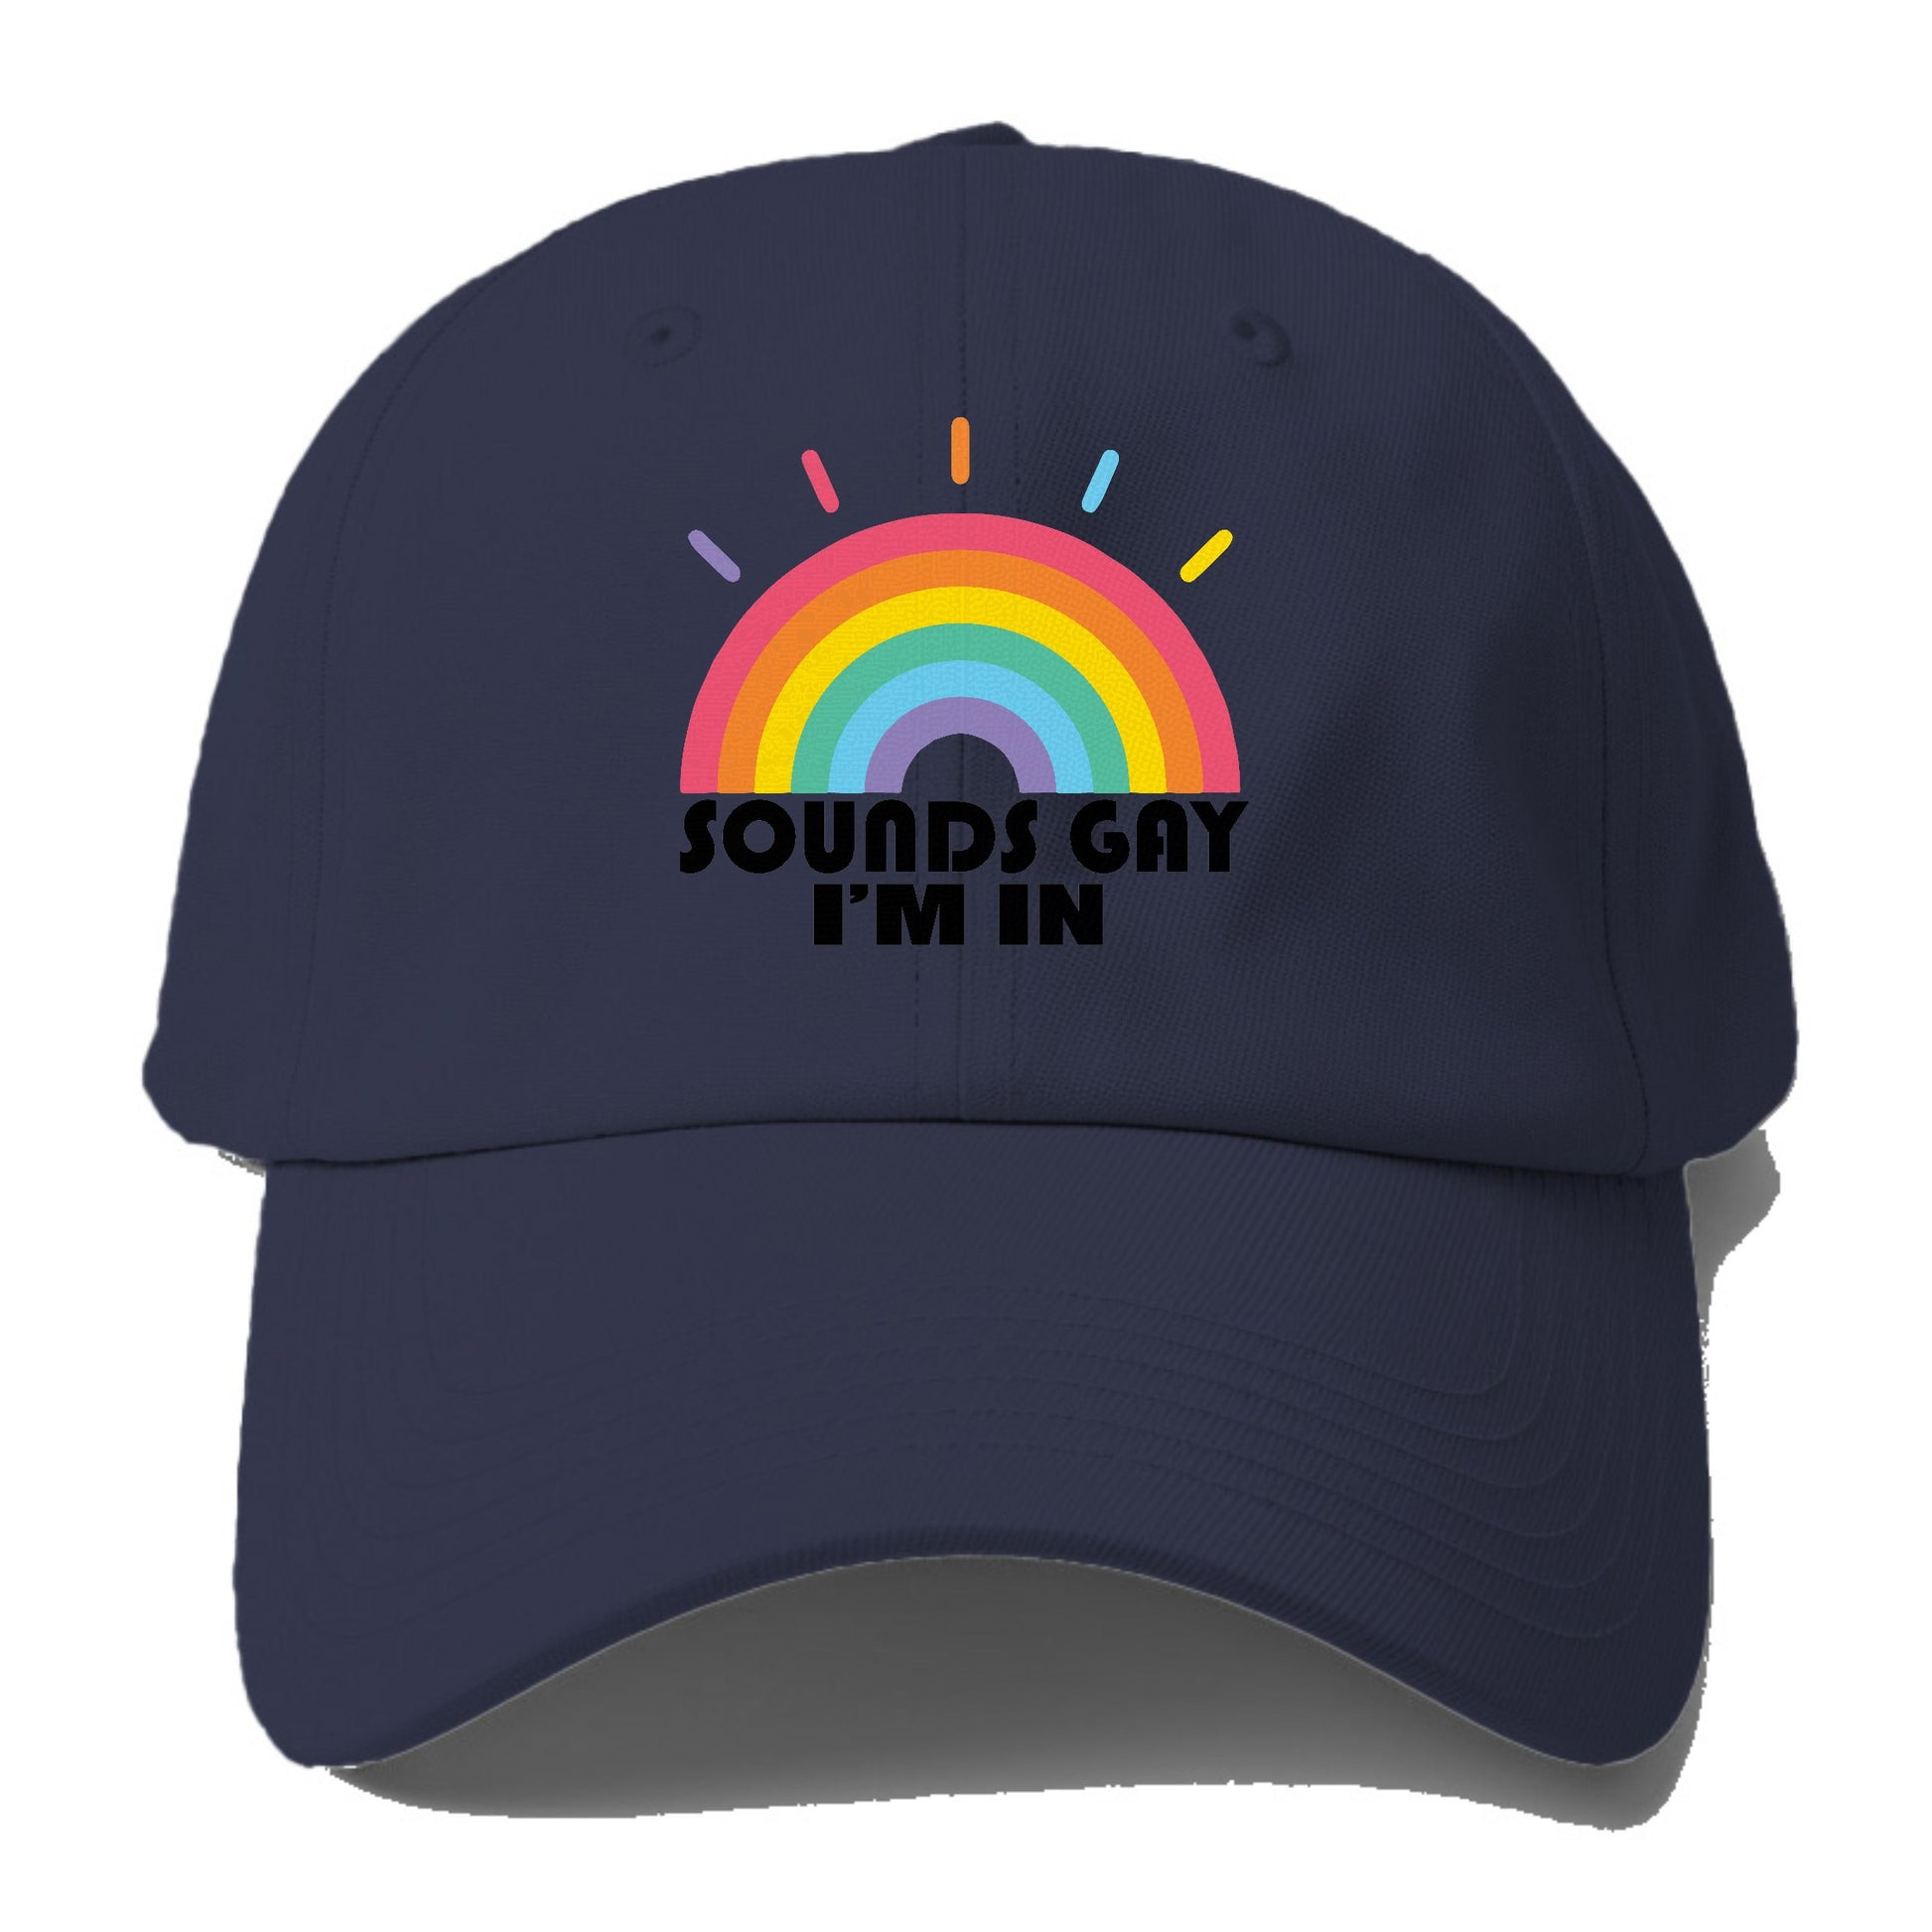 sounds gay i'm in Hat